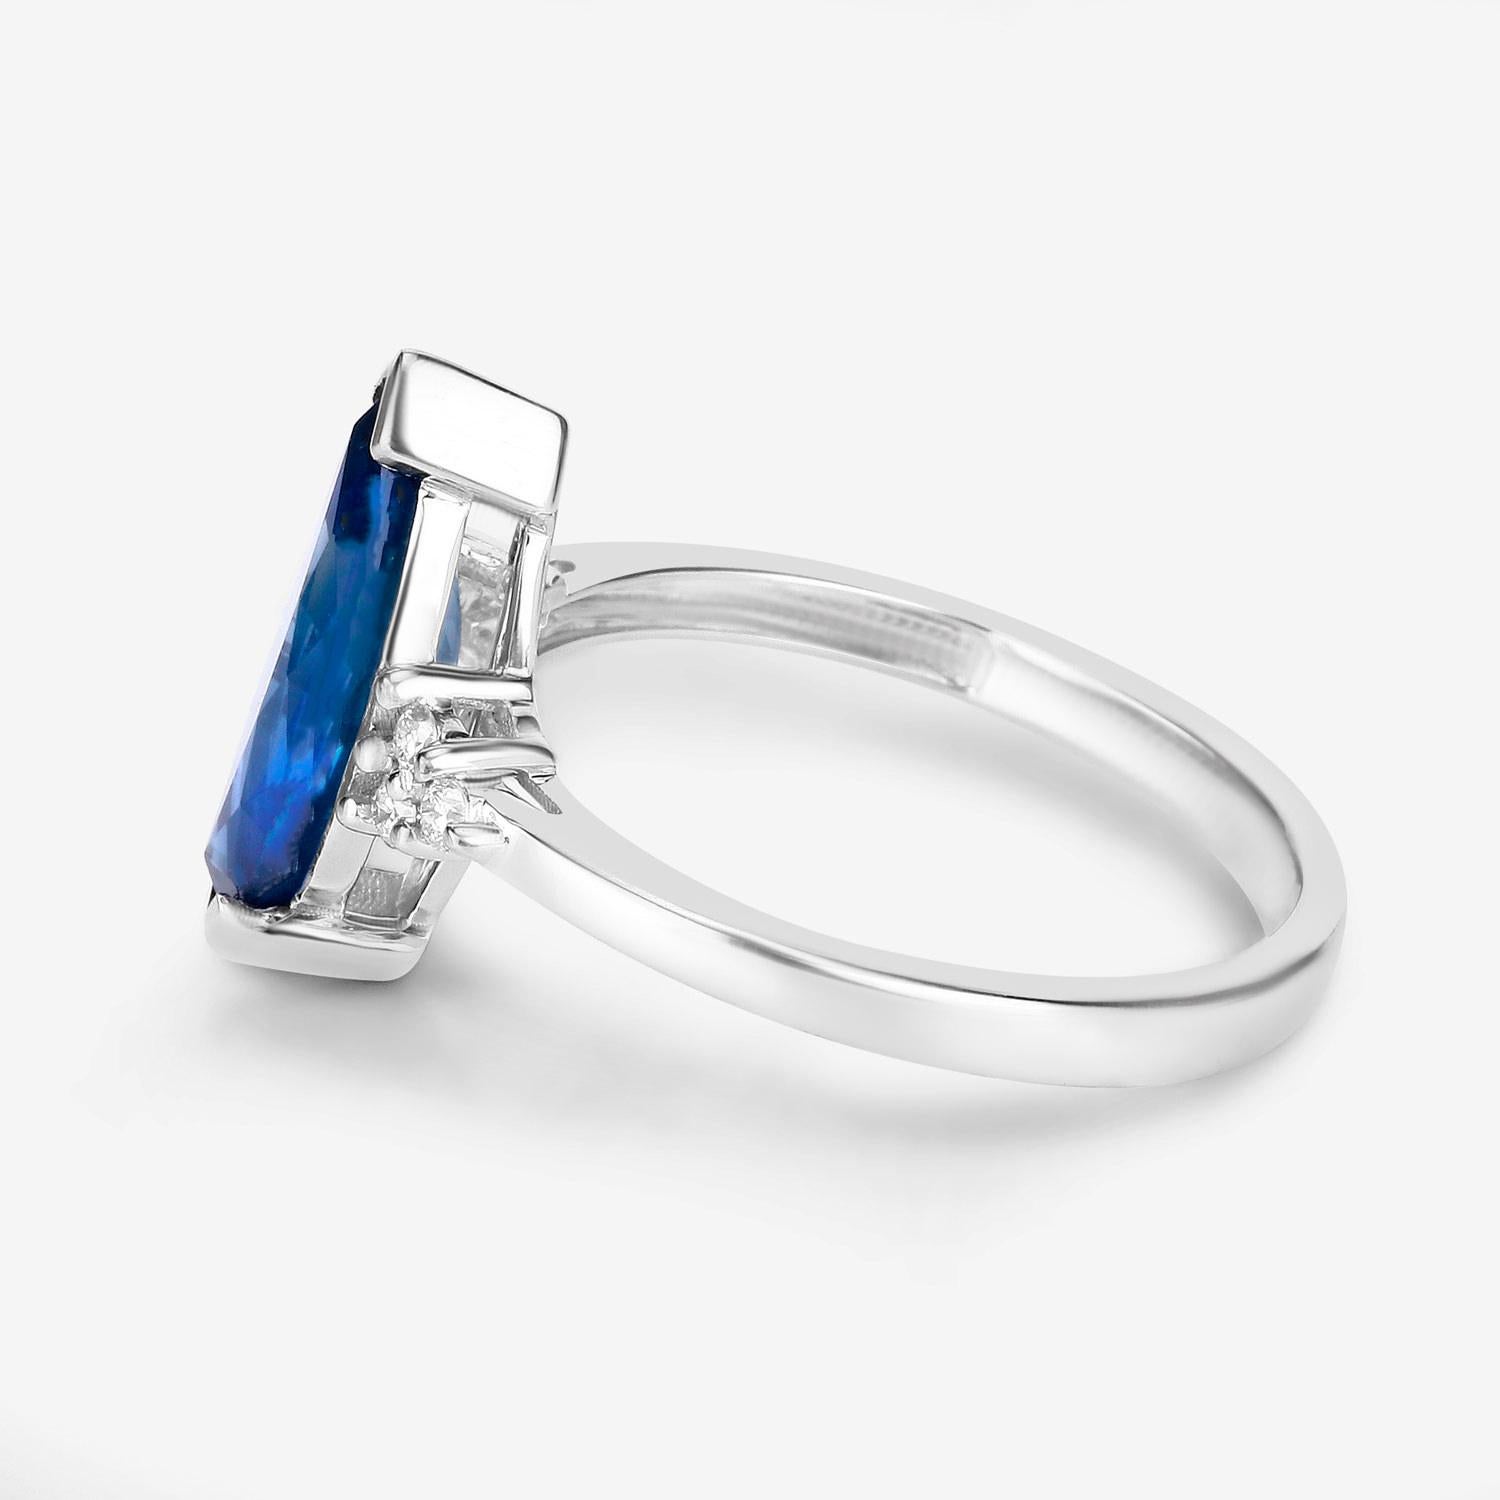 Blue Sapphire Ring With Diamonds 4.83 Carats 14K White Gold In Excellent Condition For Sale In Laguna Niguel, CA